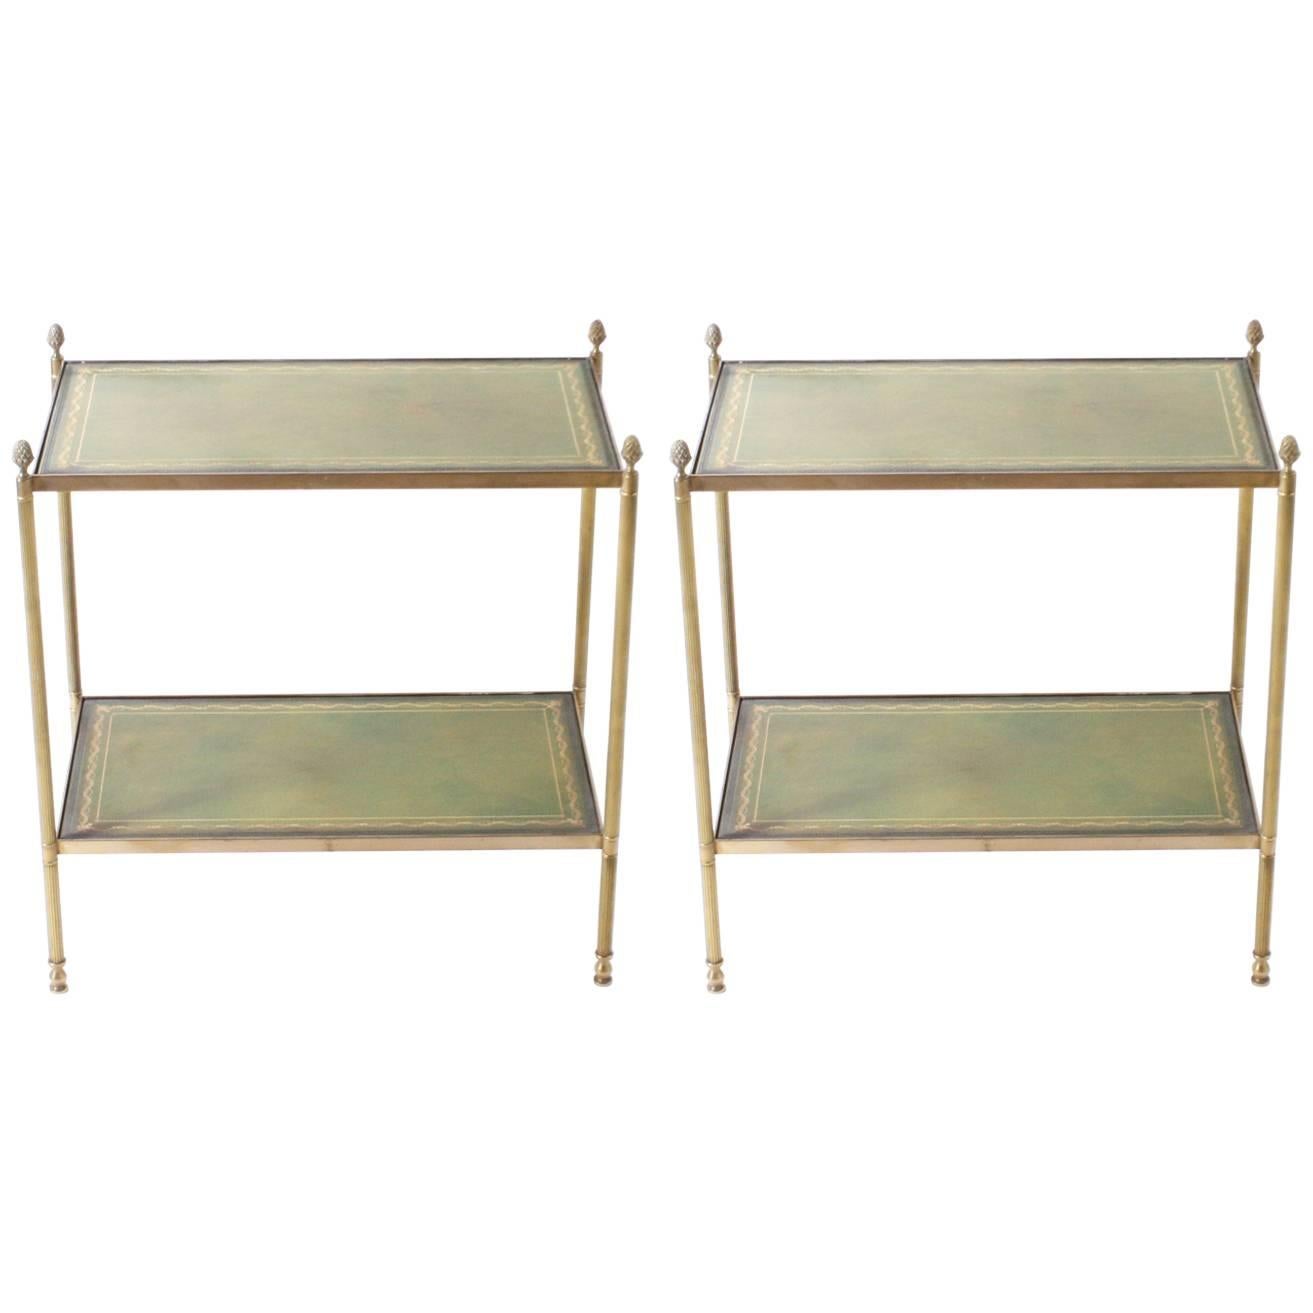 Pair of Side Tables with Green Leather Tops in the Style of Jansen, circa 1940